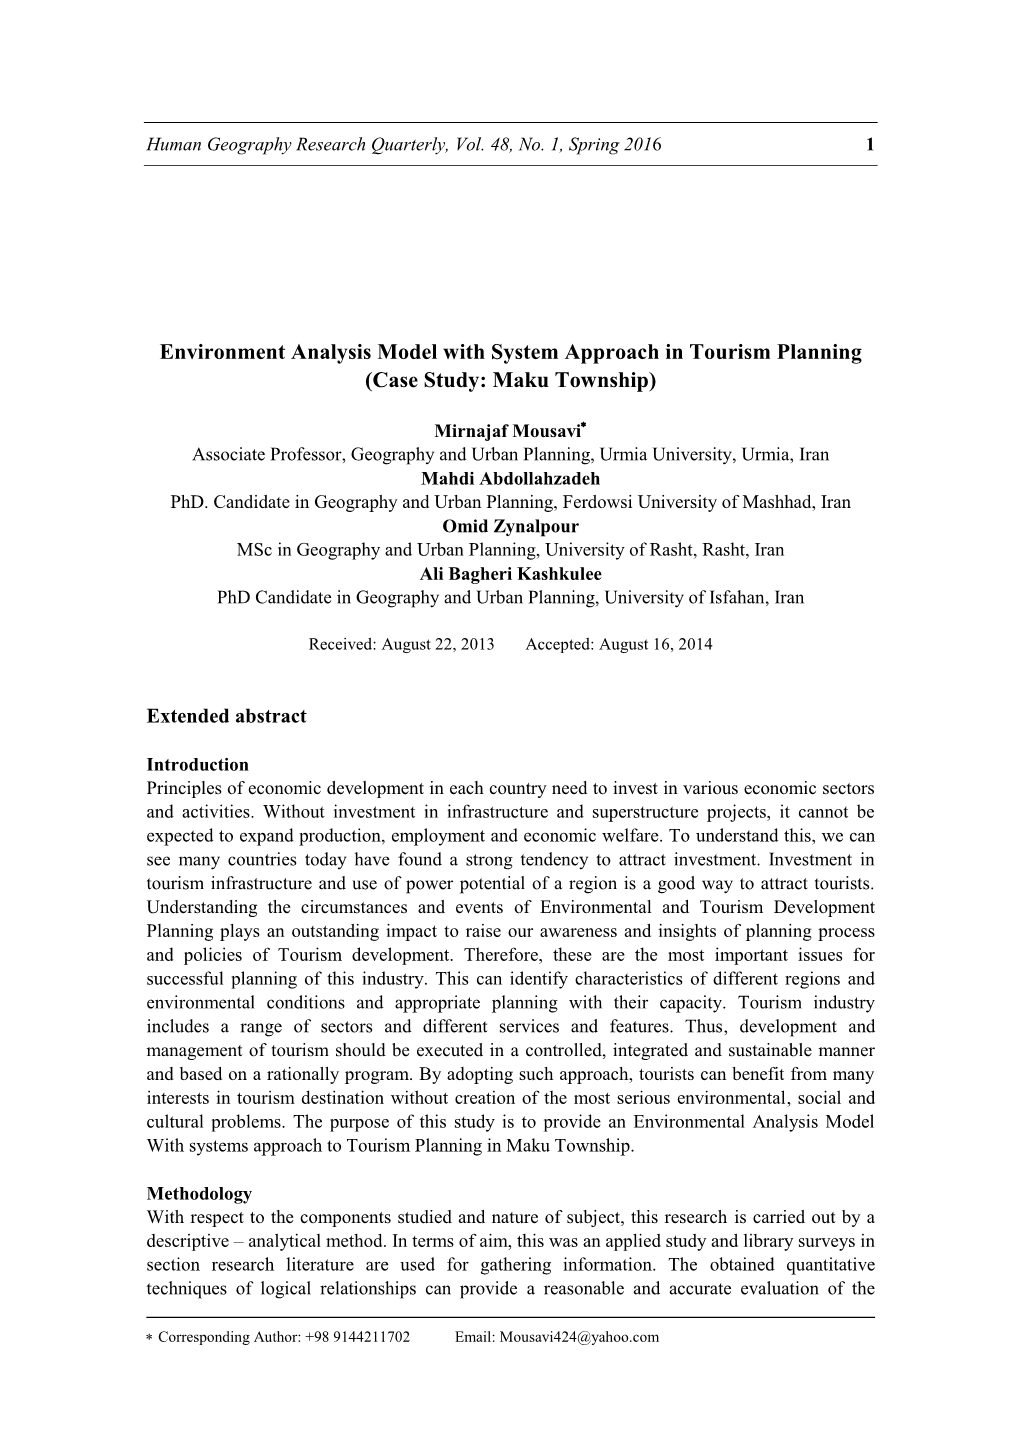 Environment Analysis Model with System Approach in Tourism Planning (Case Study: Maku Township)